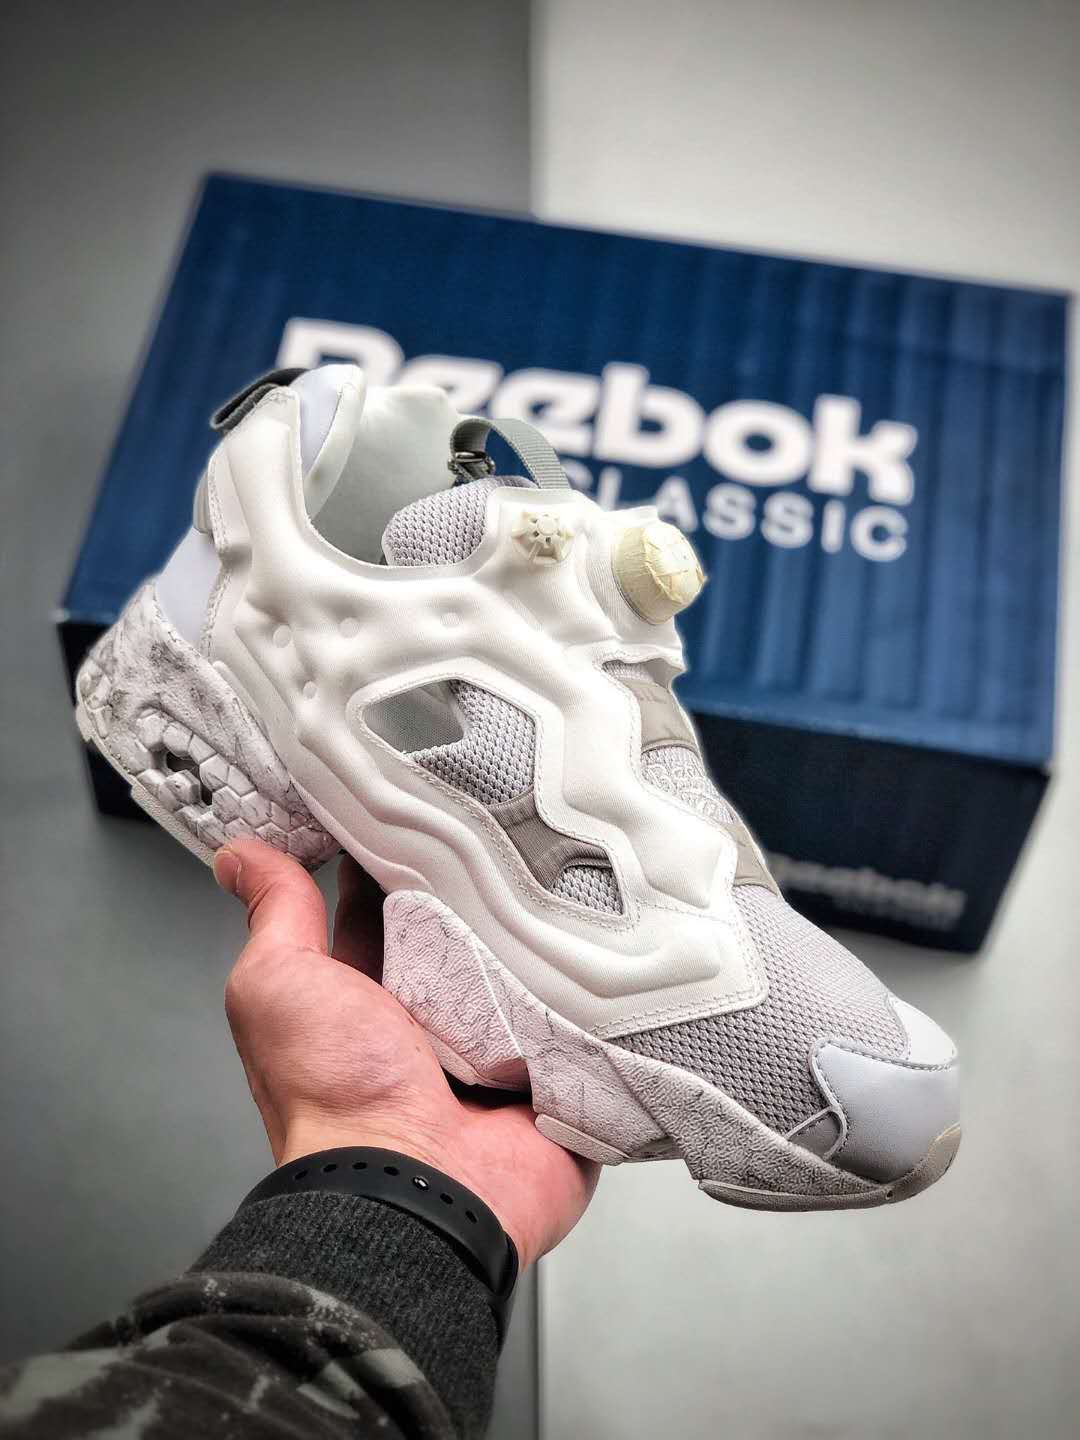 Reebok Instapump Fury Achm Running Shoes White BD1550 - Lightweight and Stylish Footwear